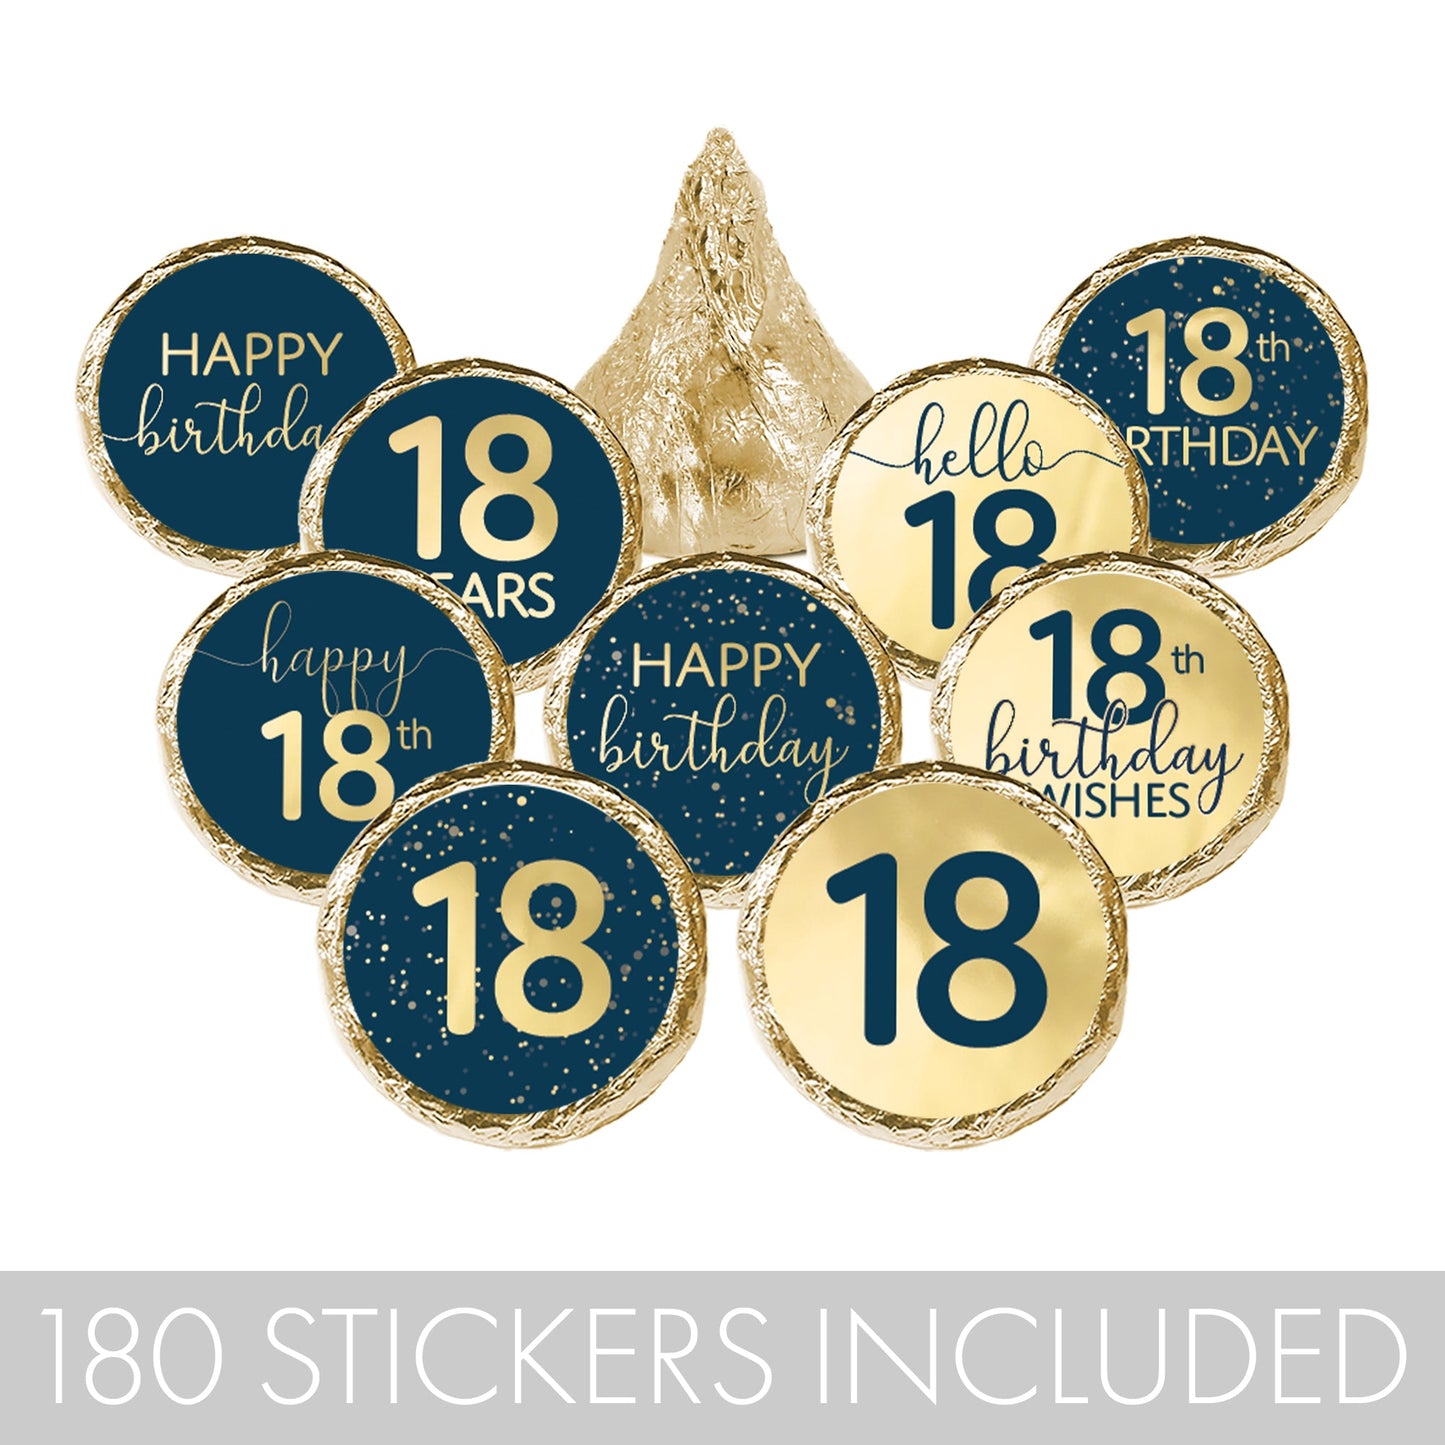 0.75" across Hershey's Kisses stickers with a navy blue and gold foil design